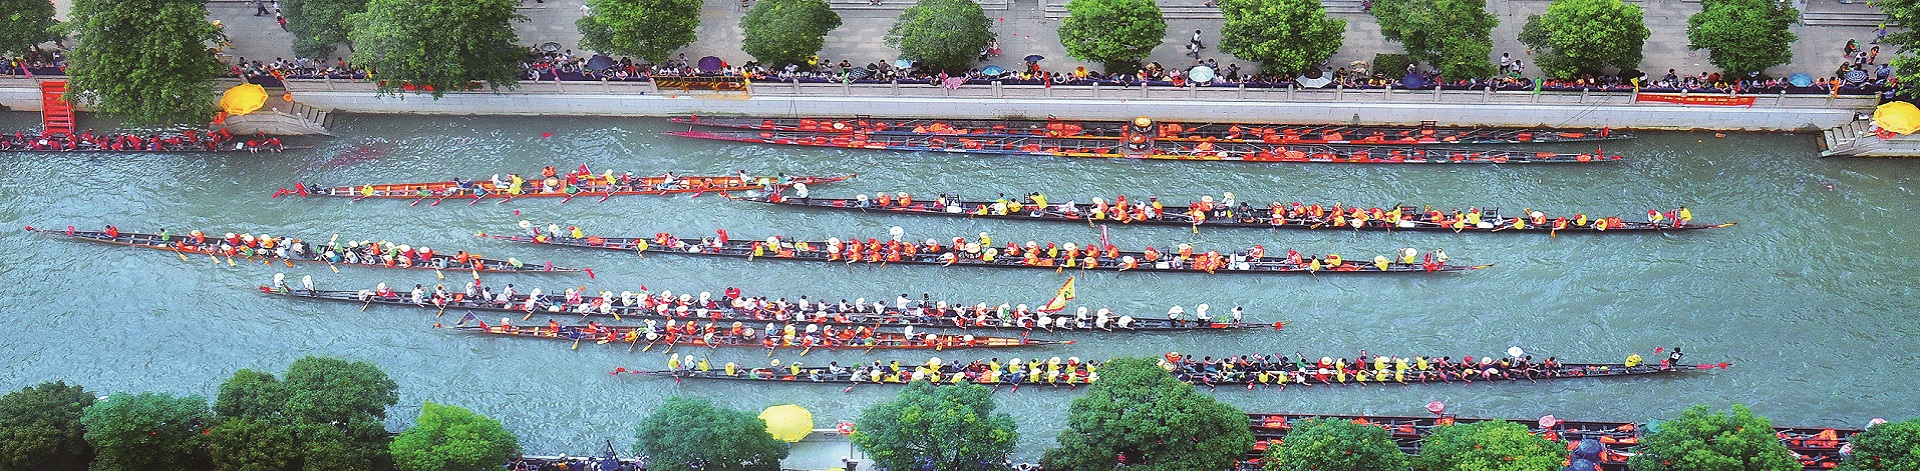 Chebei dragon boats reveal elegance